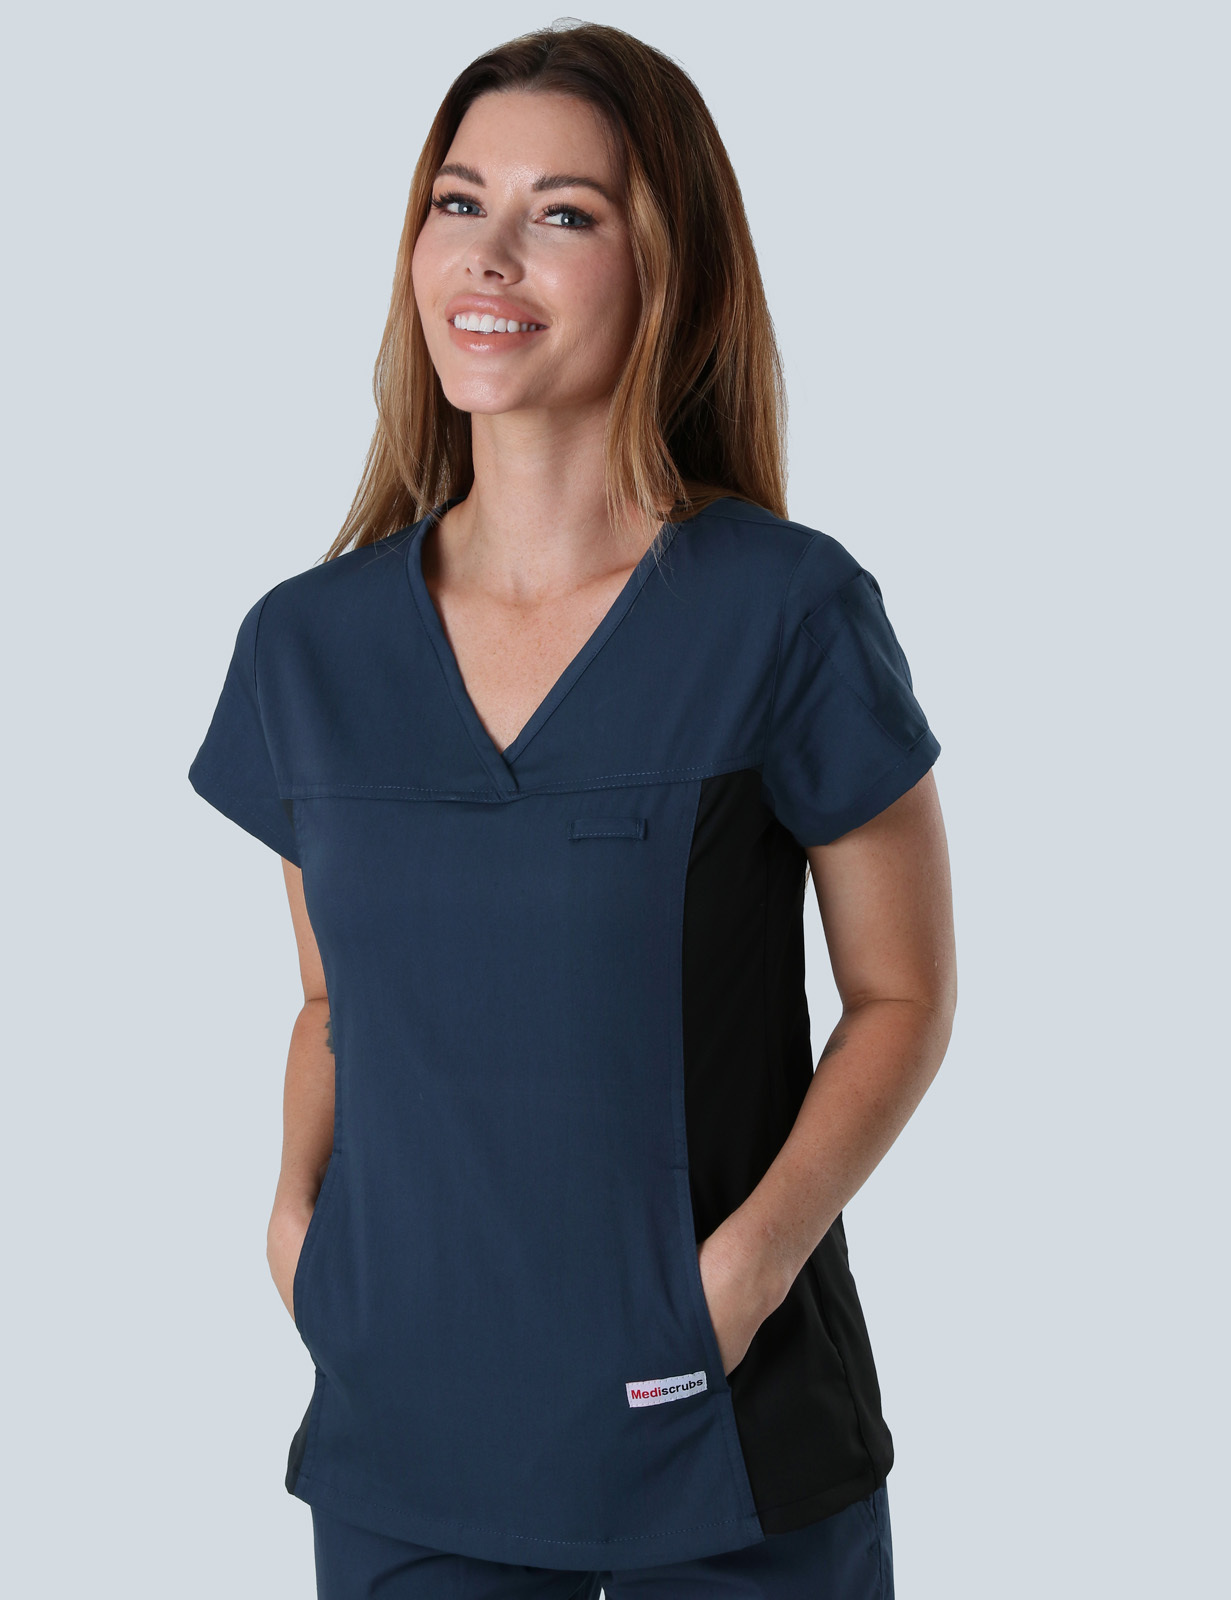 RBWH - 7A South CN (Women's Fit Spandex Scrub Top and Cargo Pants in Navy incl Logos)